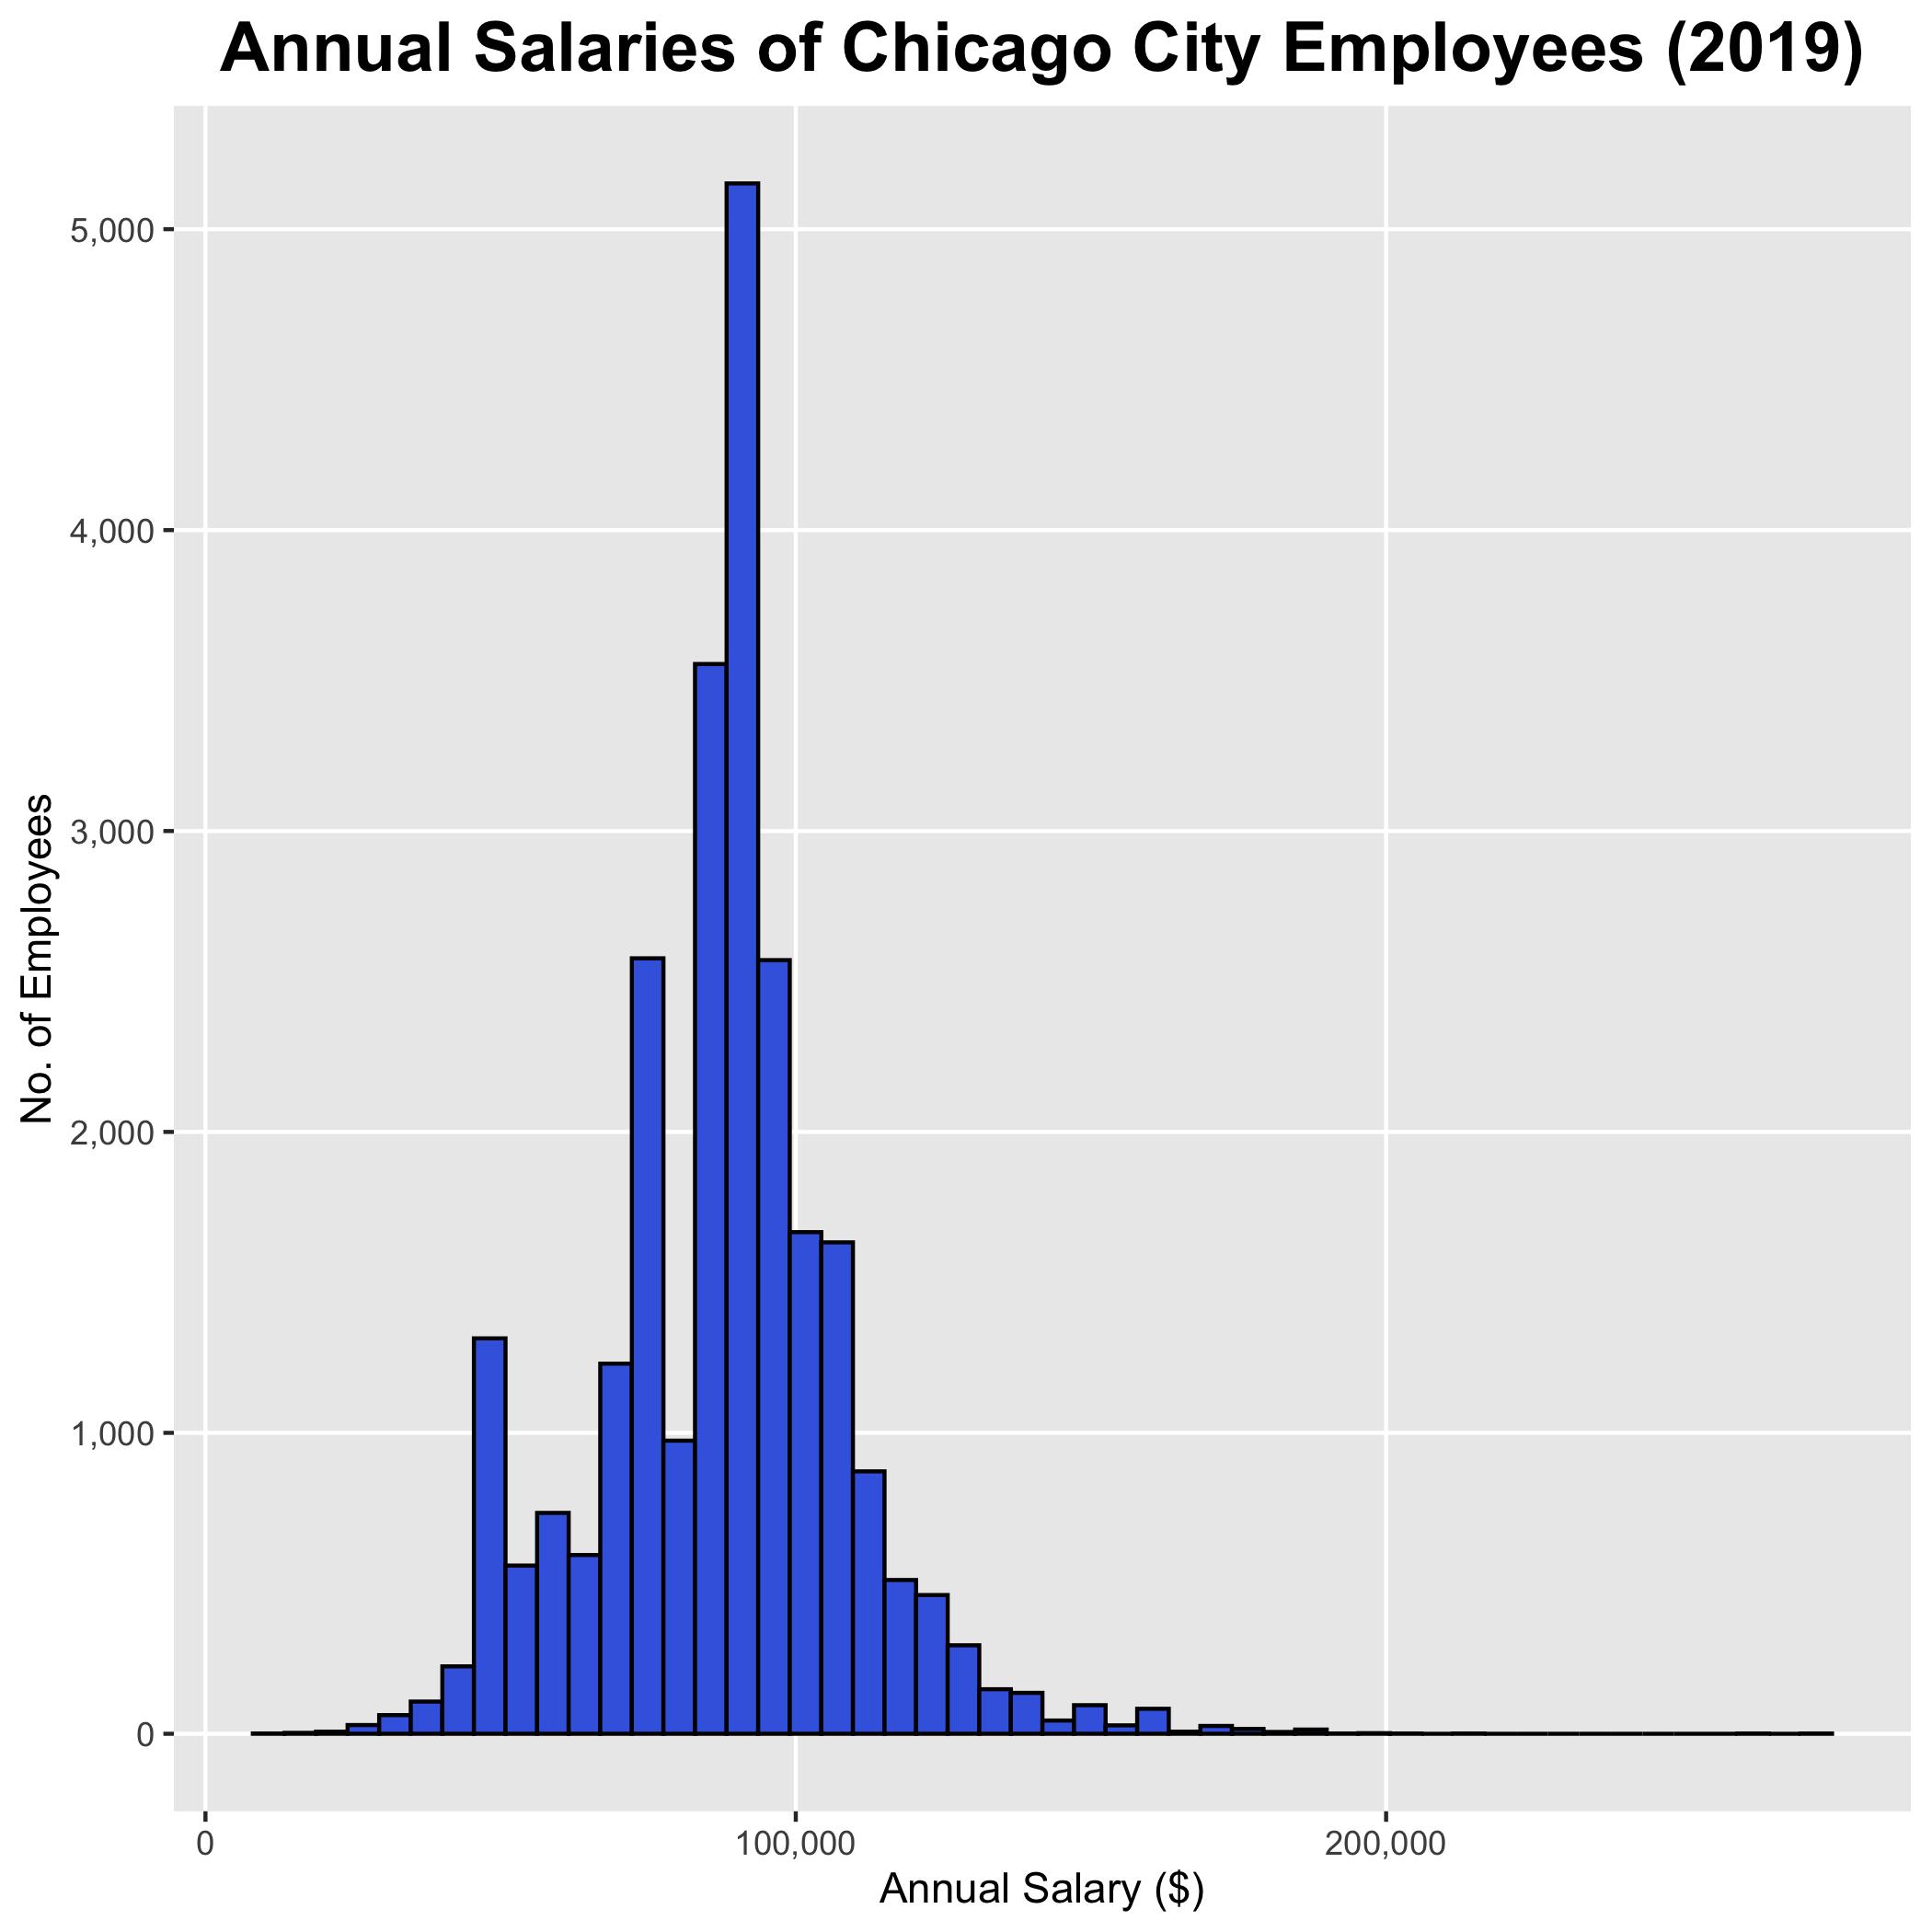 Histogram of annual salaries for employees of the City government of Chicago